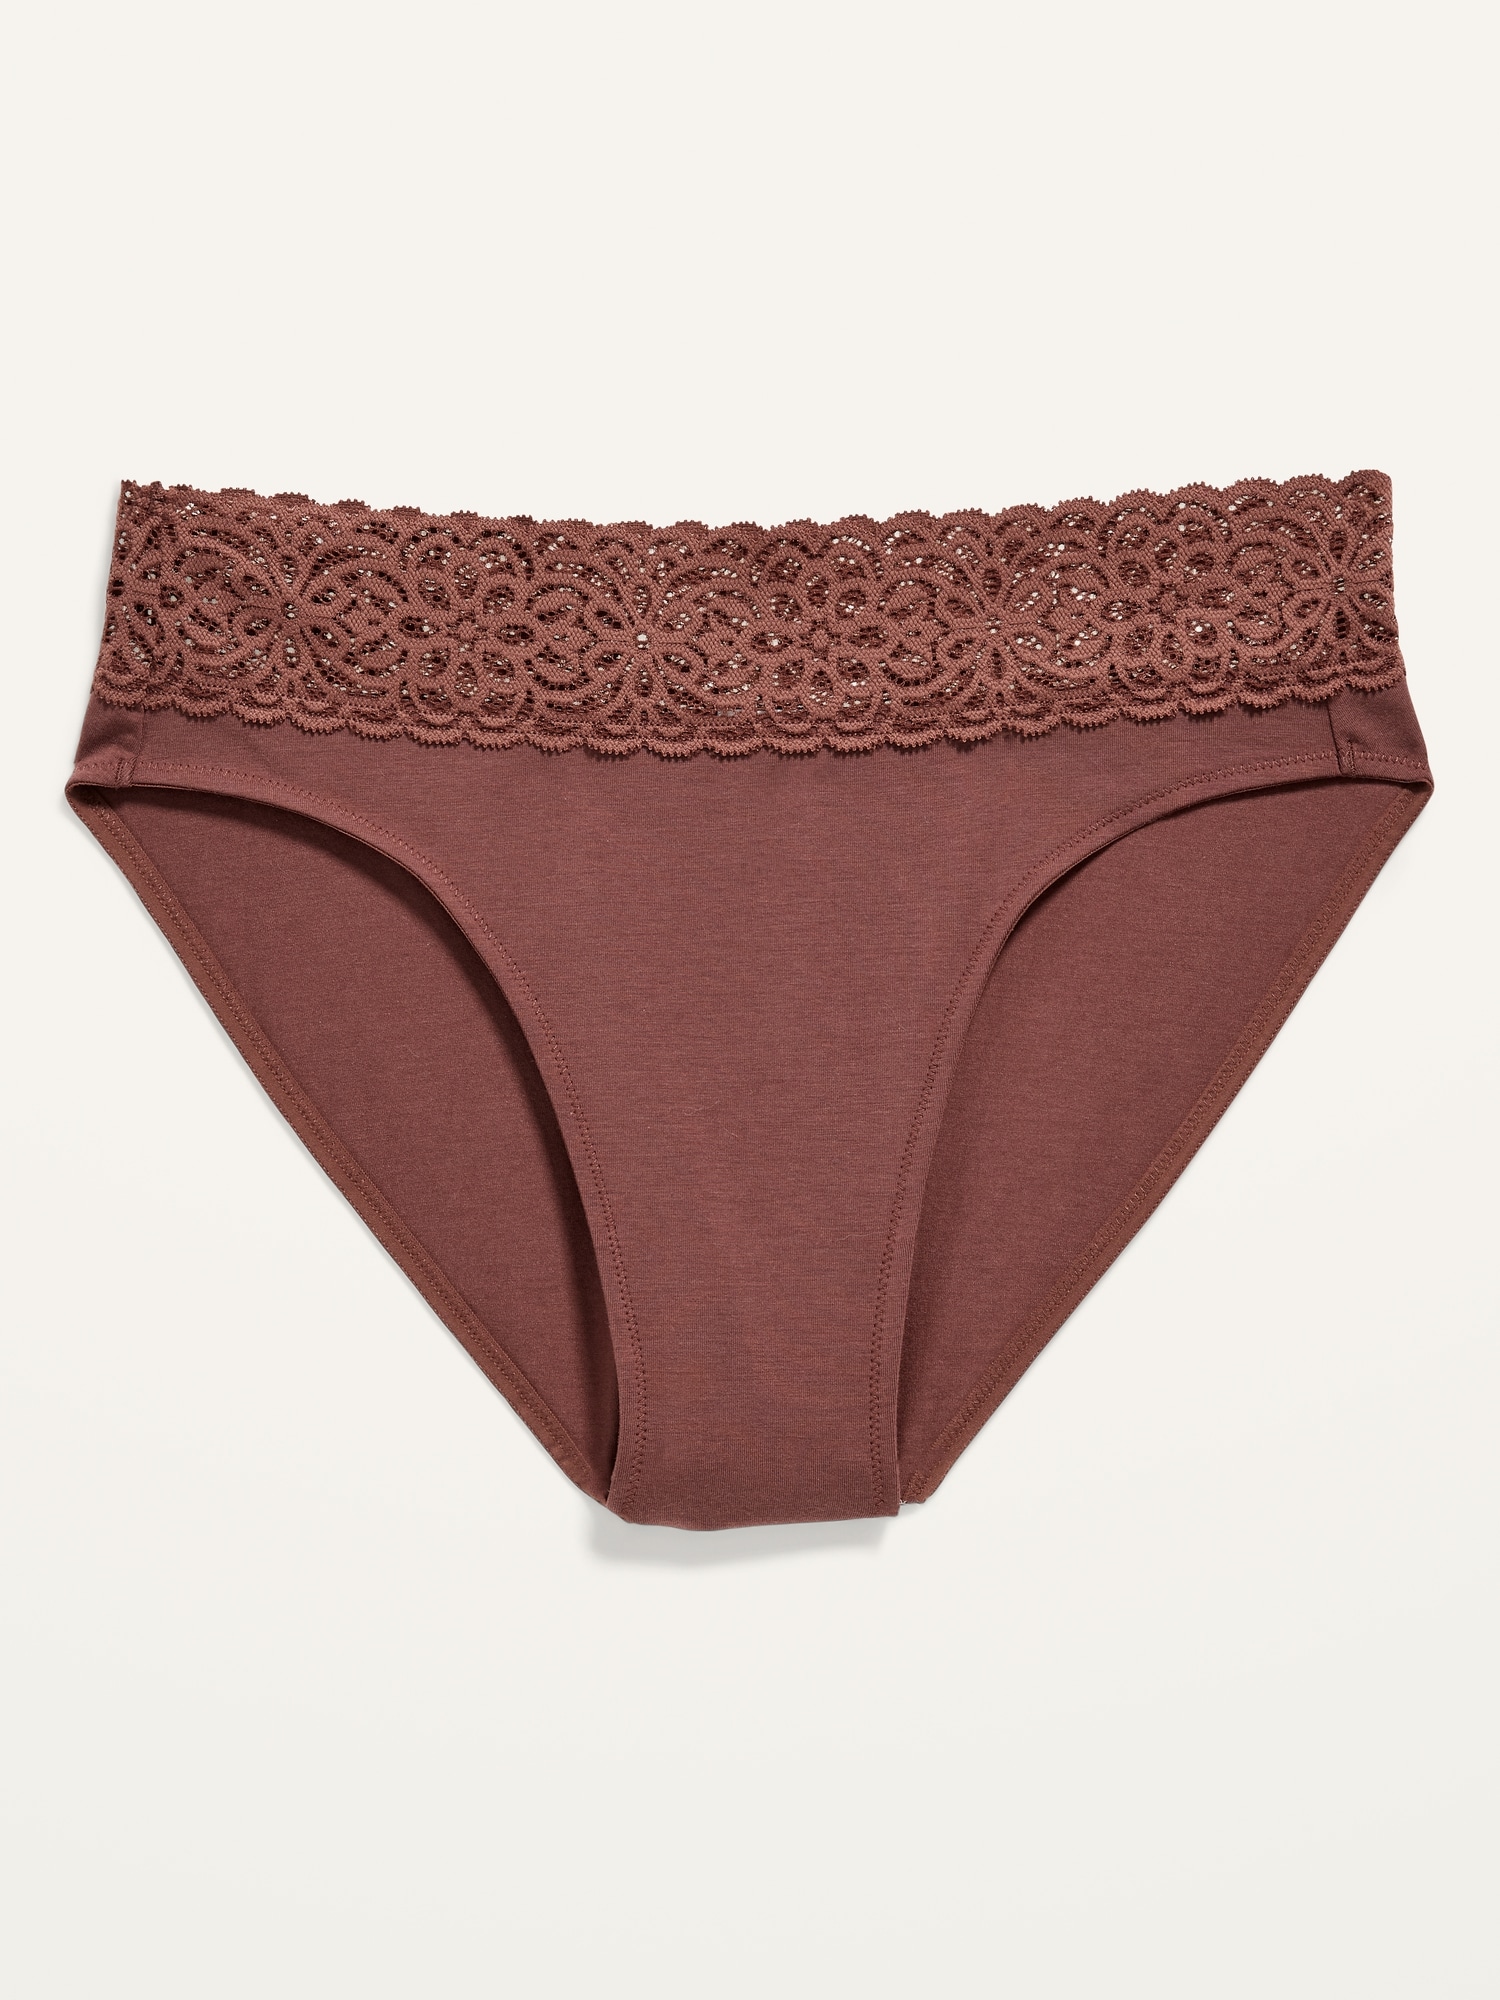 Old Navy Mid-Rise Supima® Cotton-Blend Lace-Trimmed Bikini Underwear for Women brown. 1